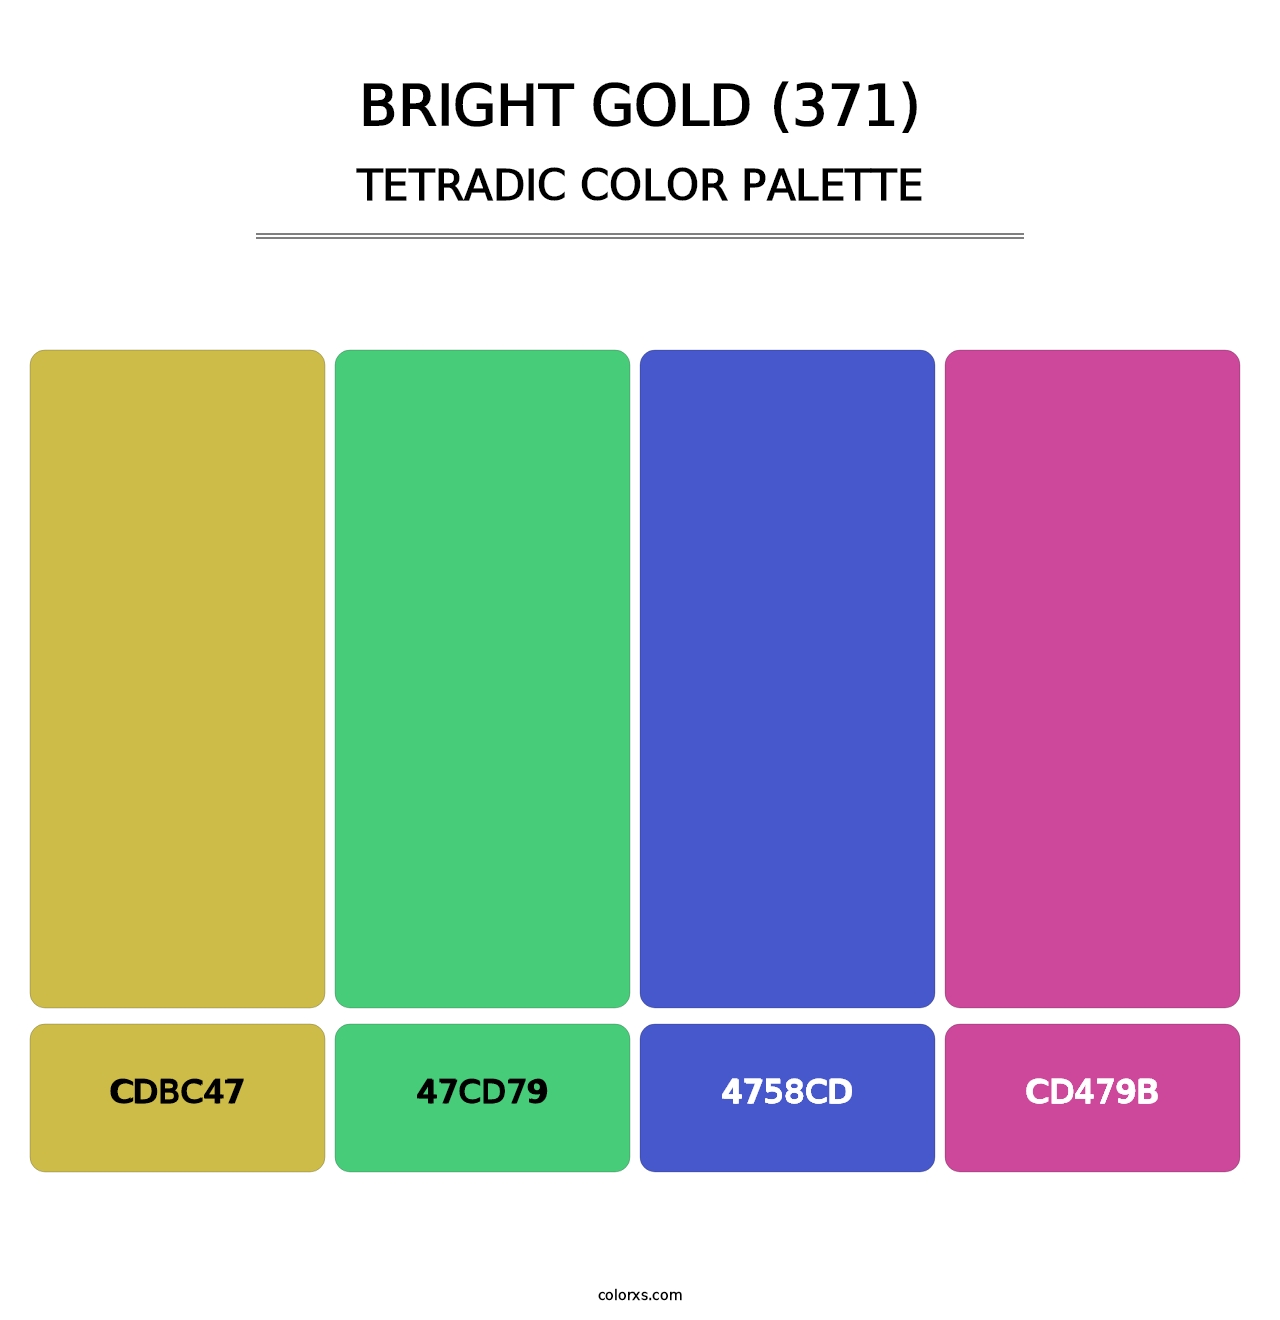 Bright Gold (371) - Tetradic Color Palette